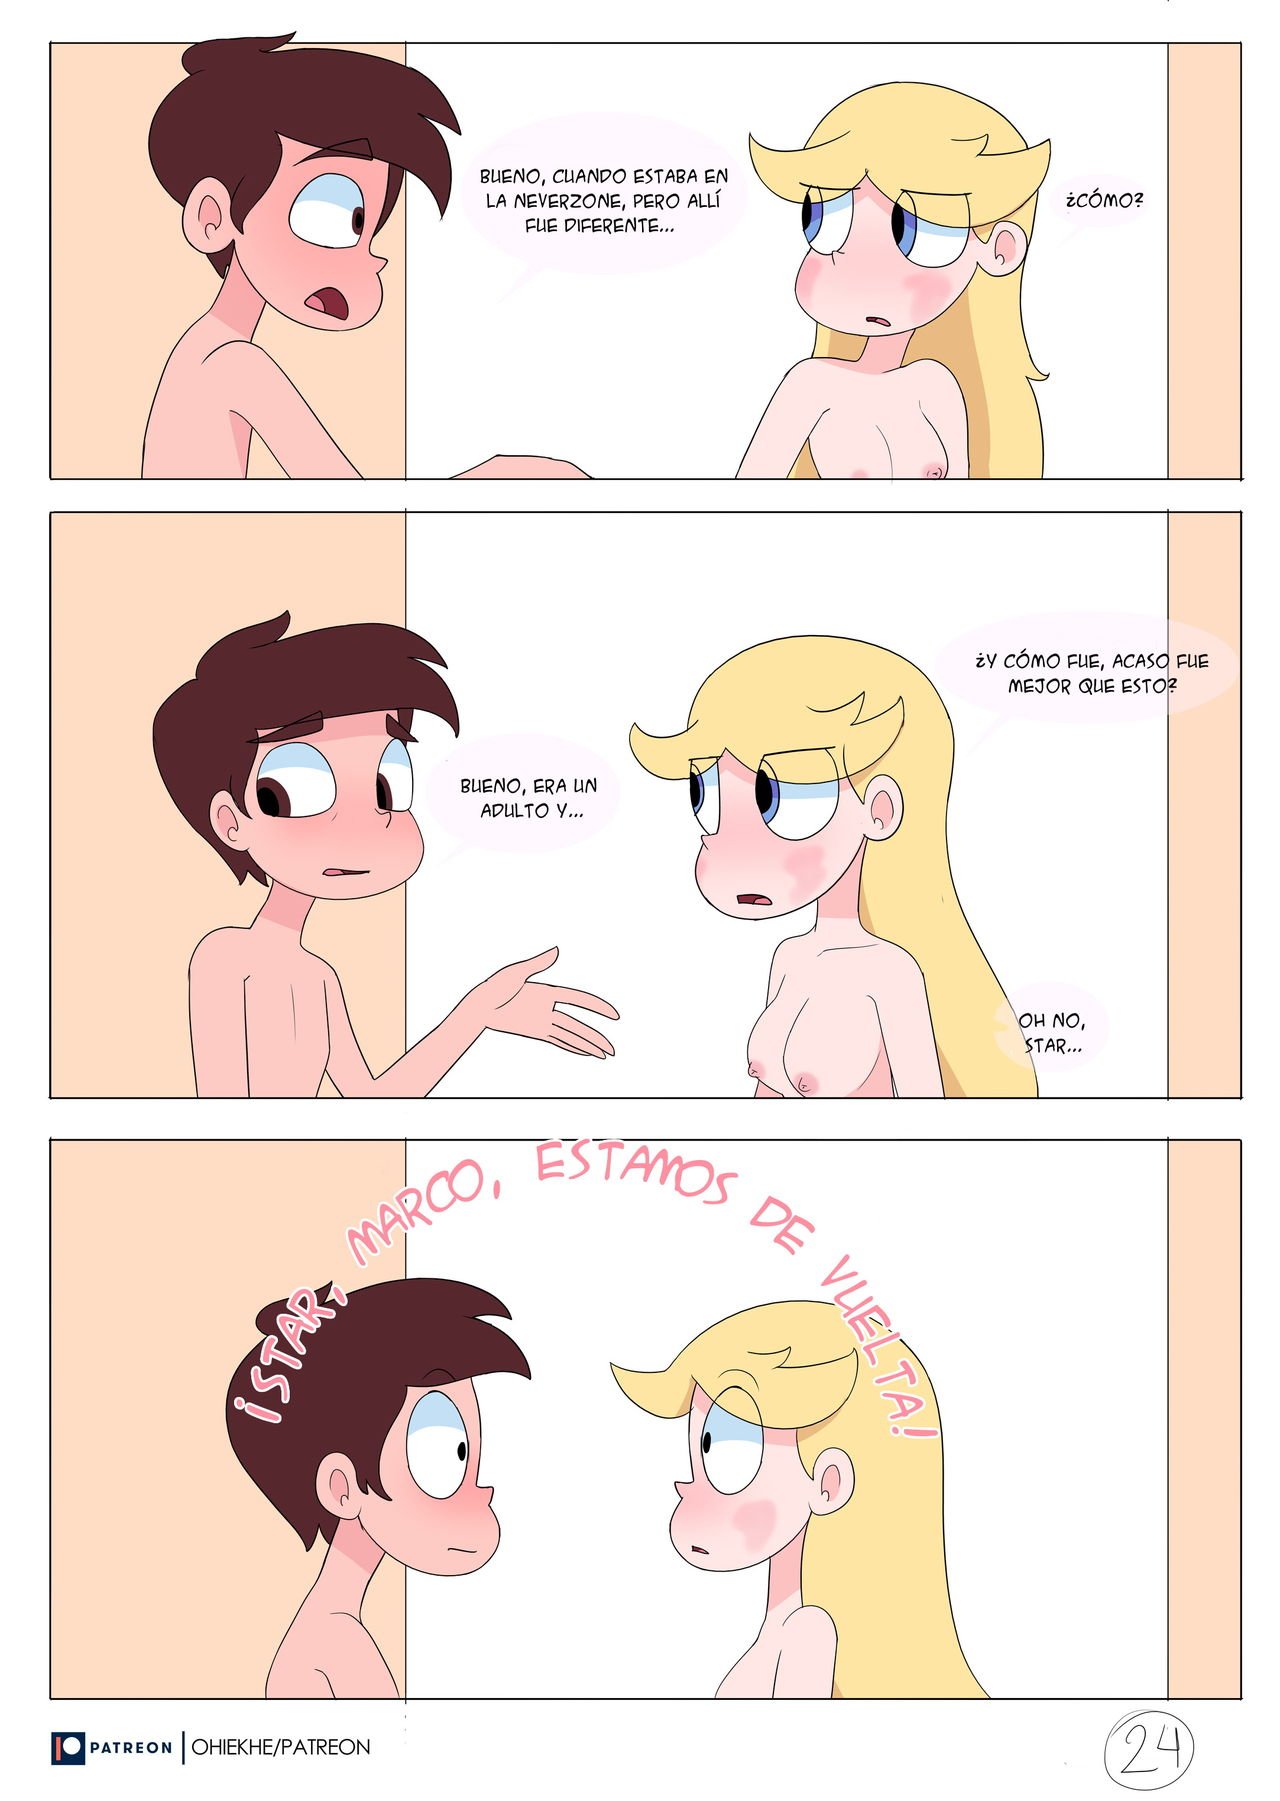 Time Alone – Star vs the Forces of Evil - 24